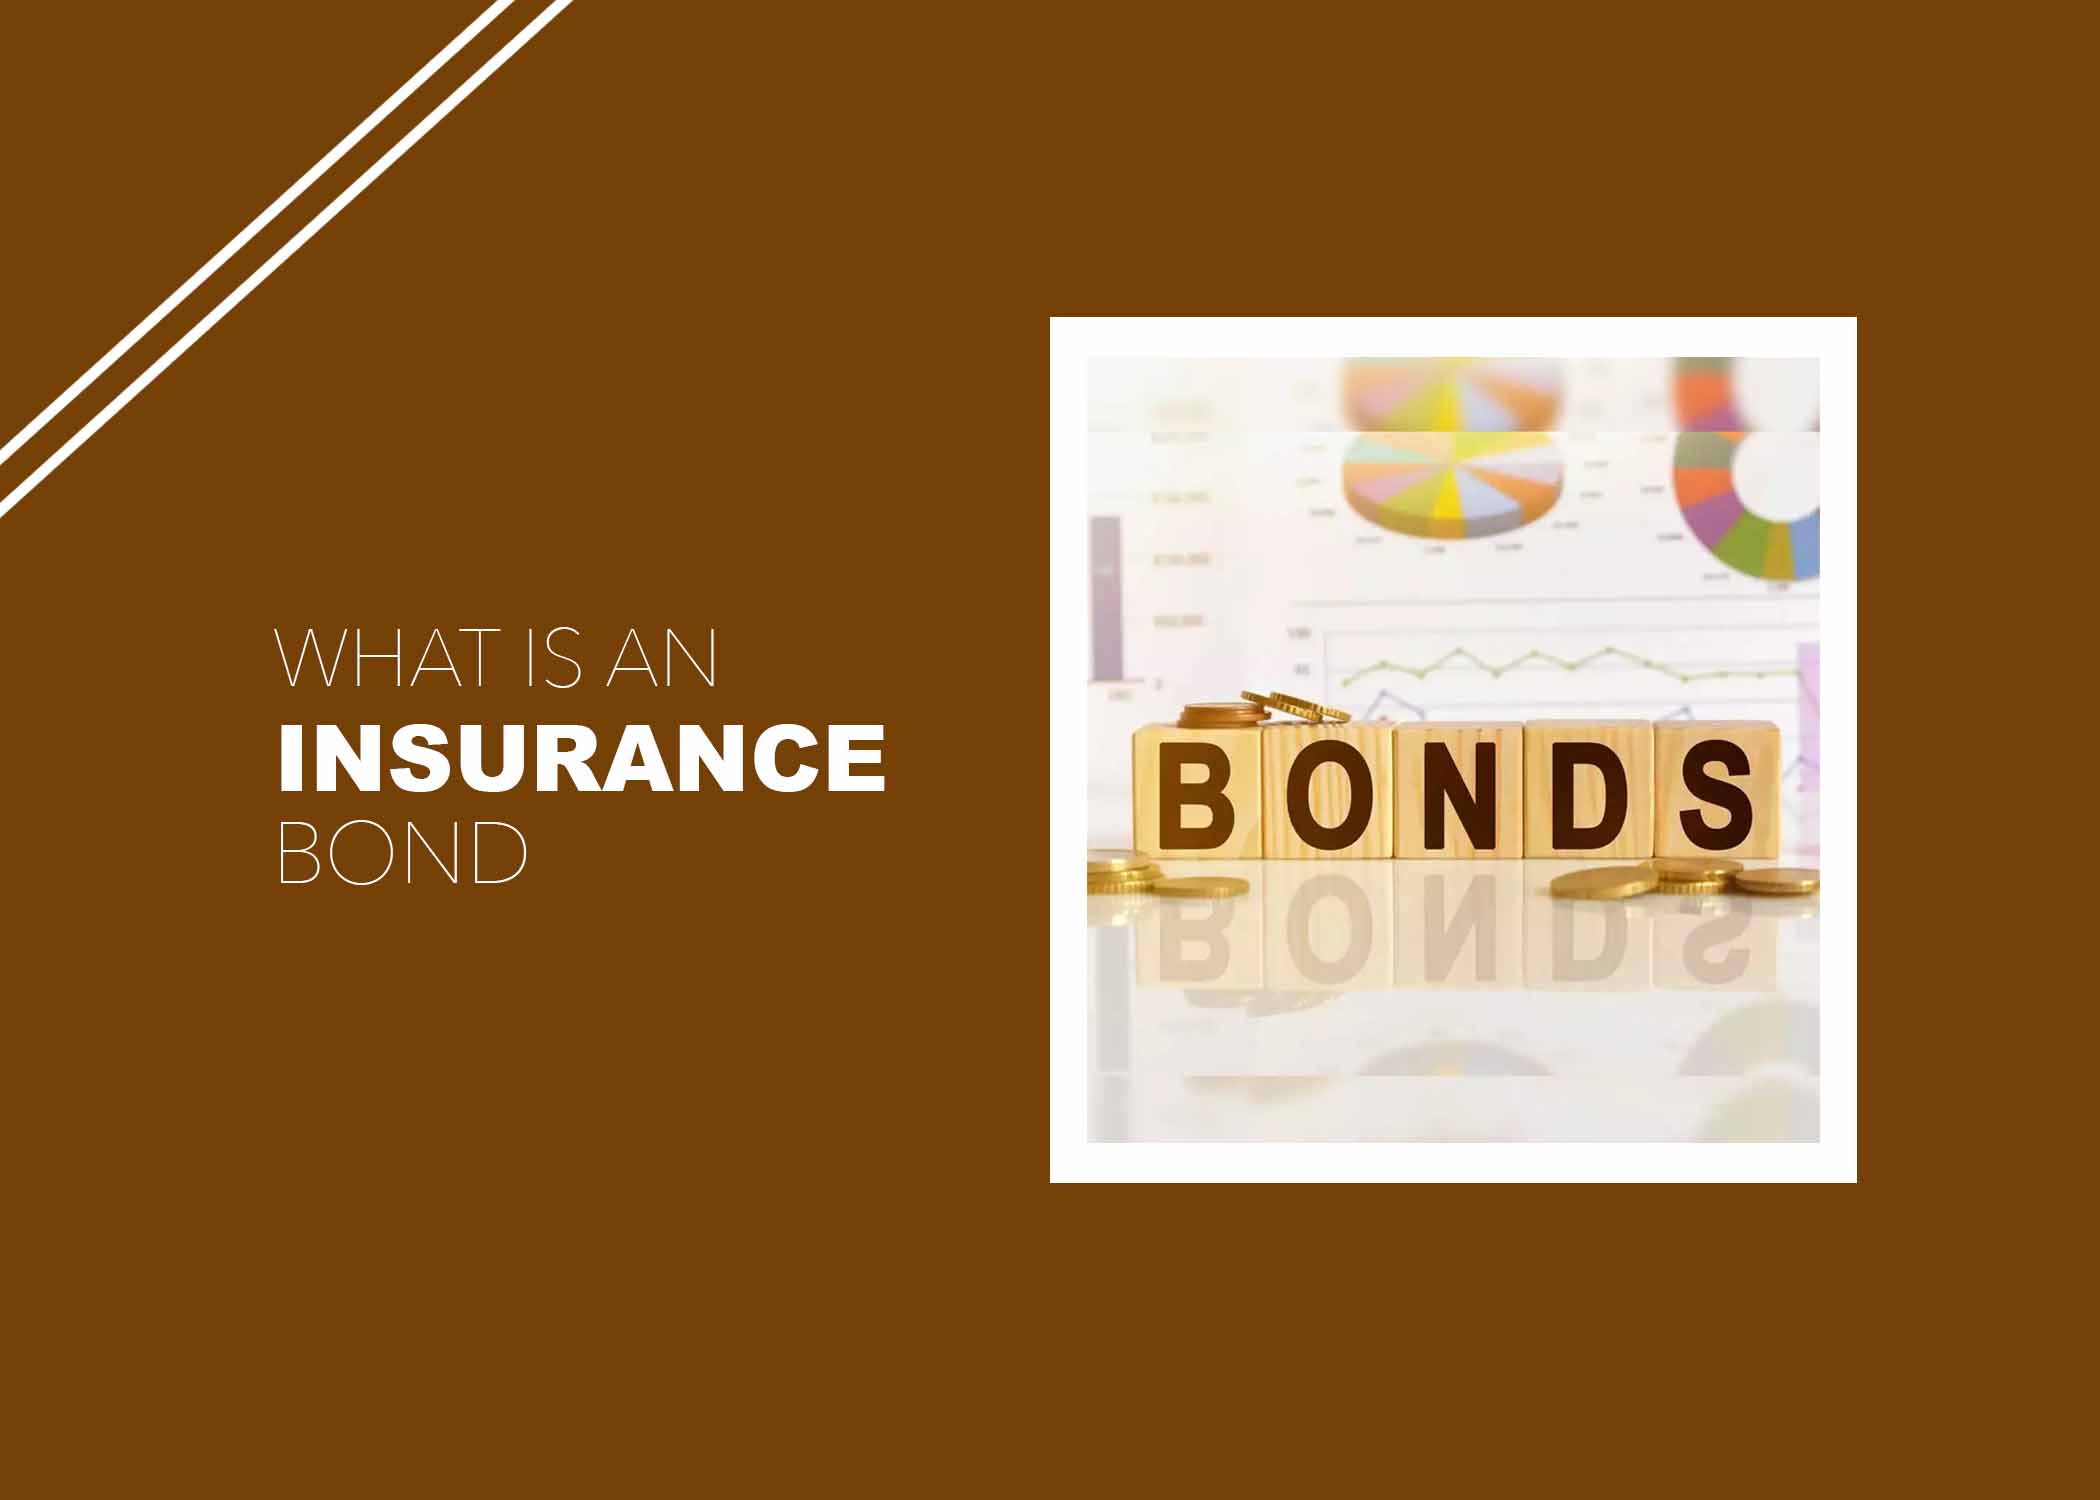 What is an Insurance Bond?